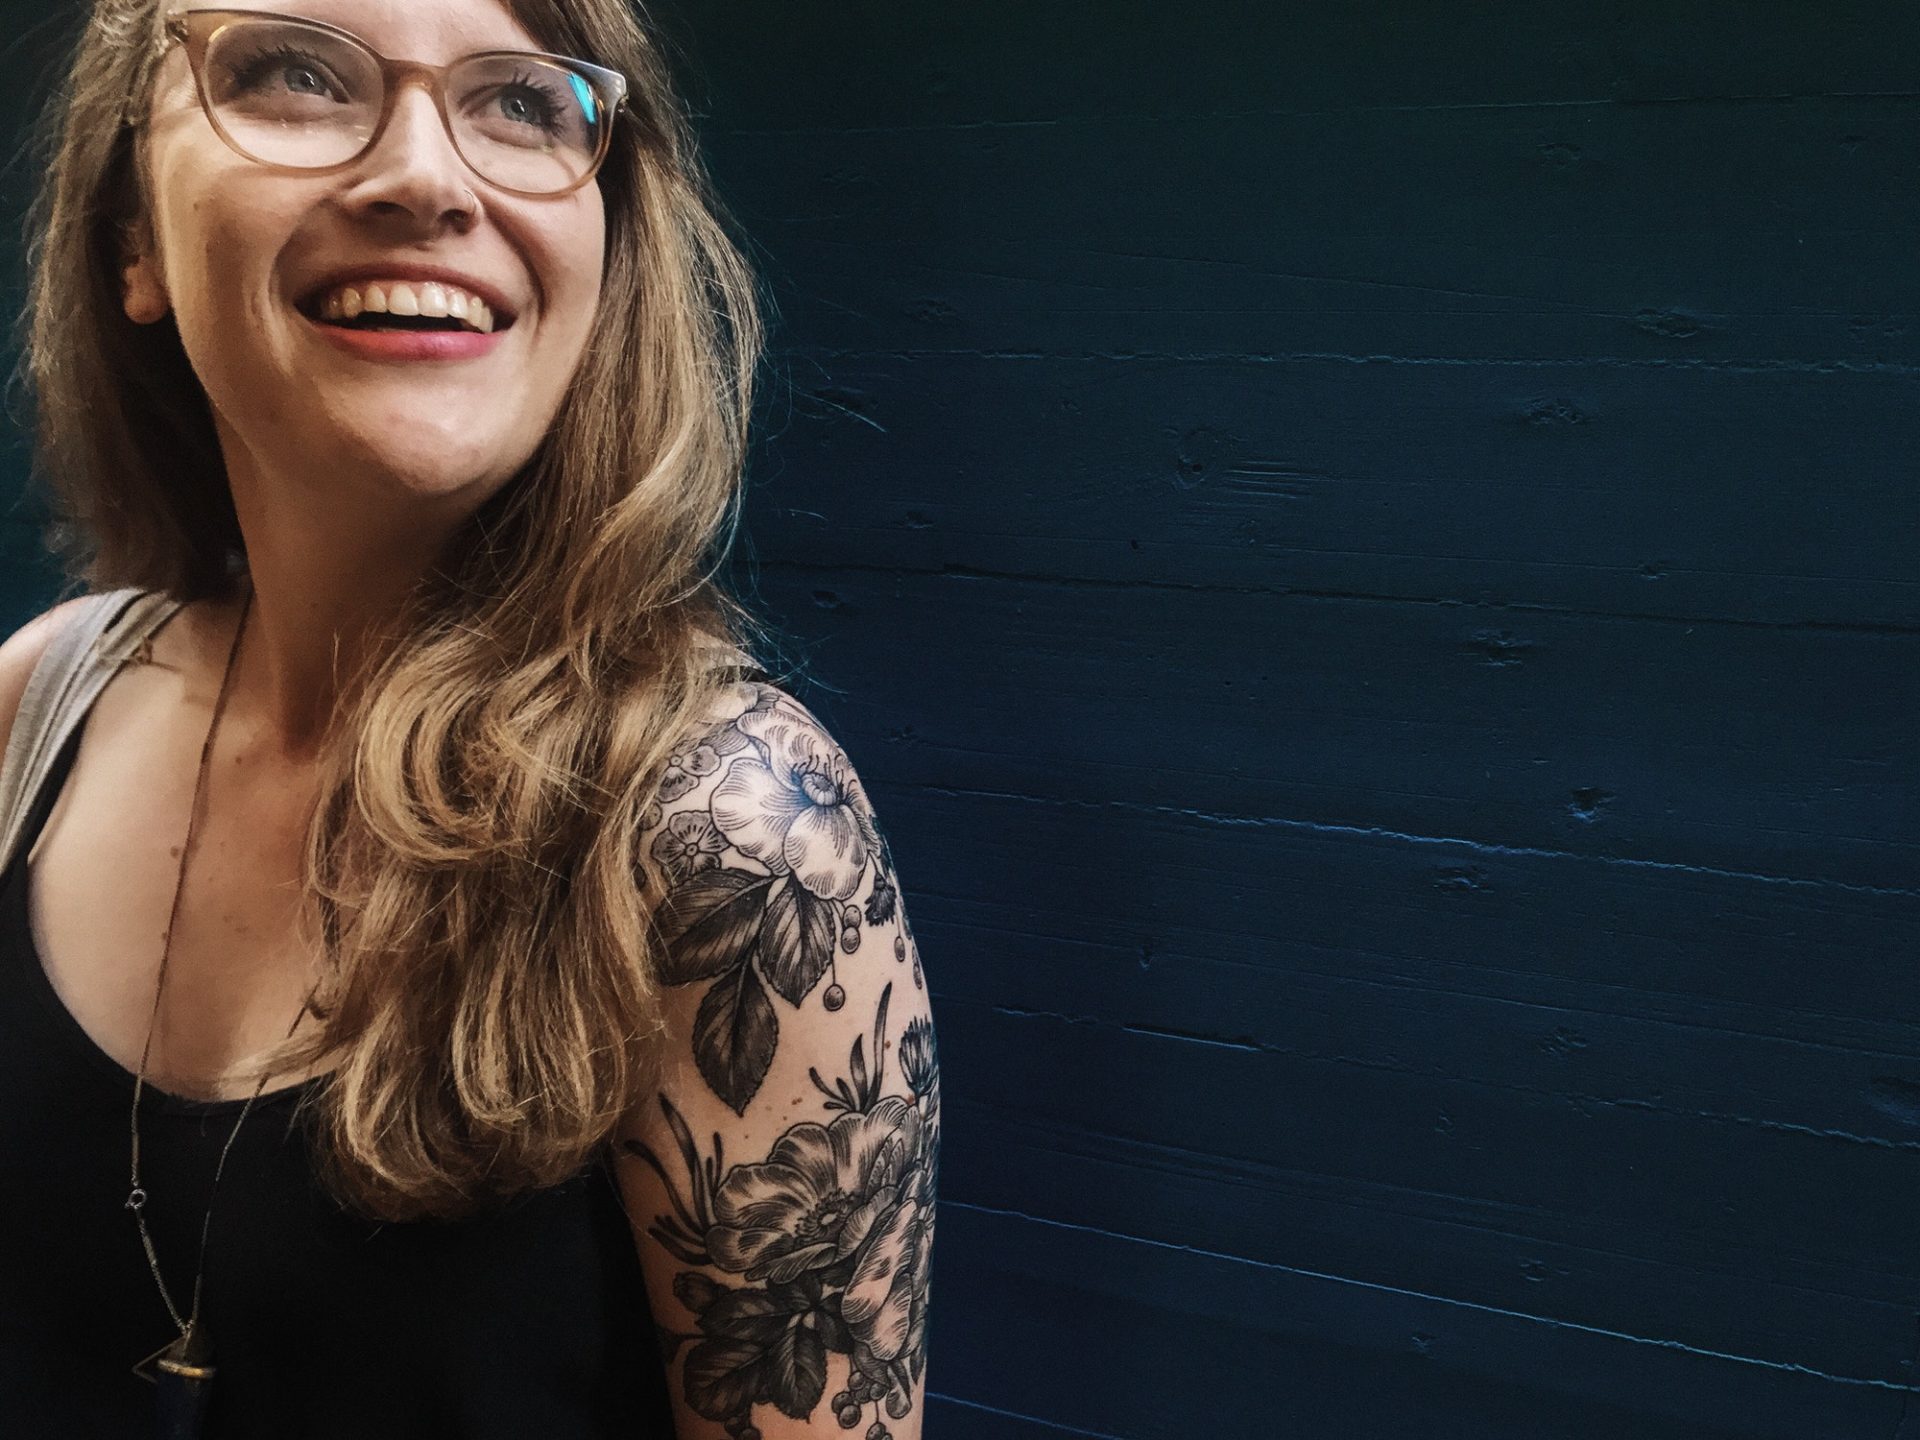 woman-with-tattoos-glasses--e1631679075970